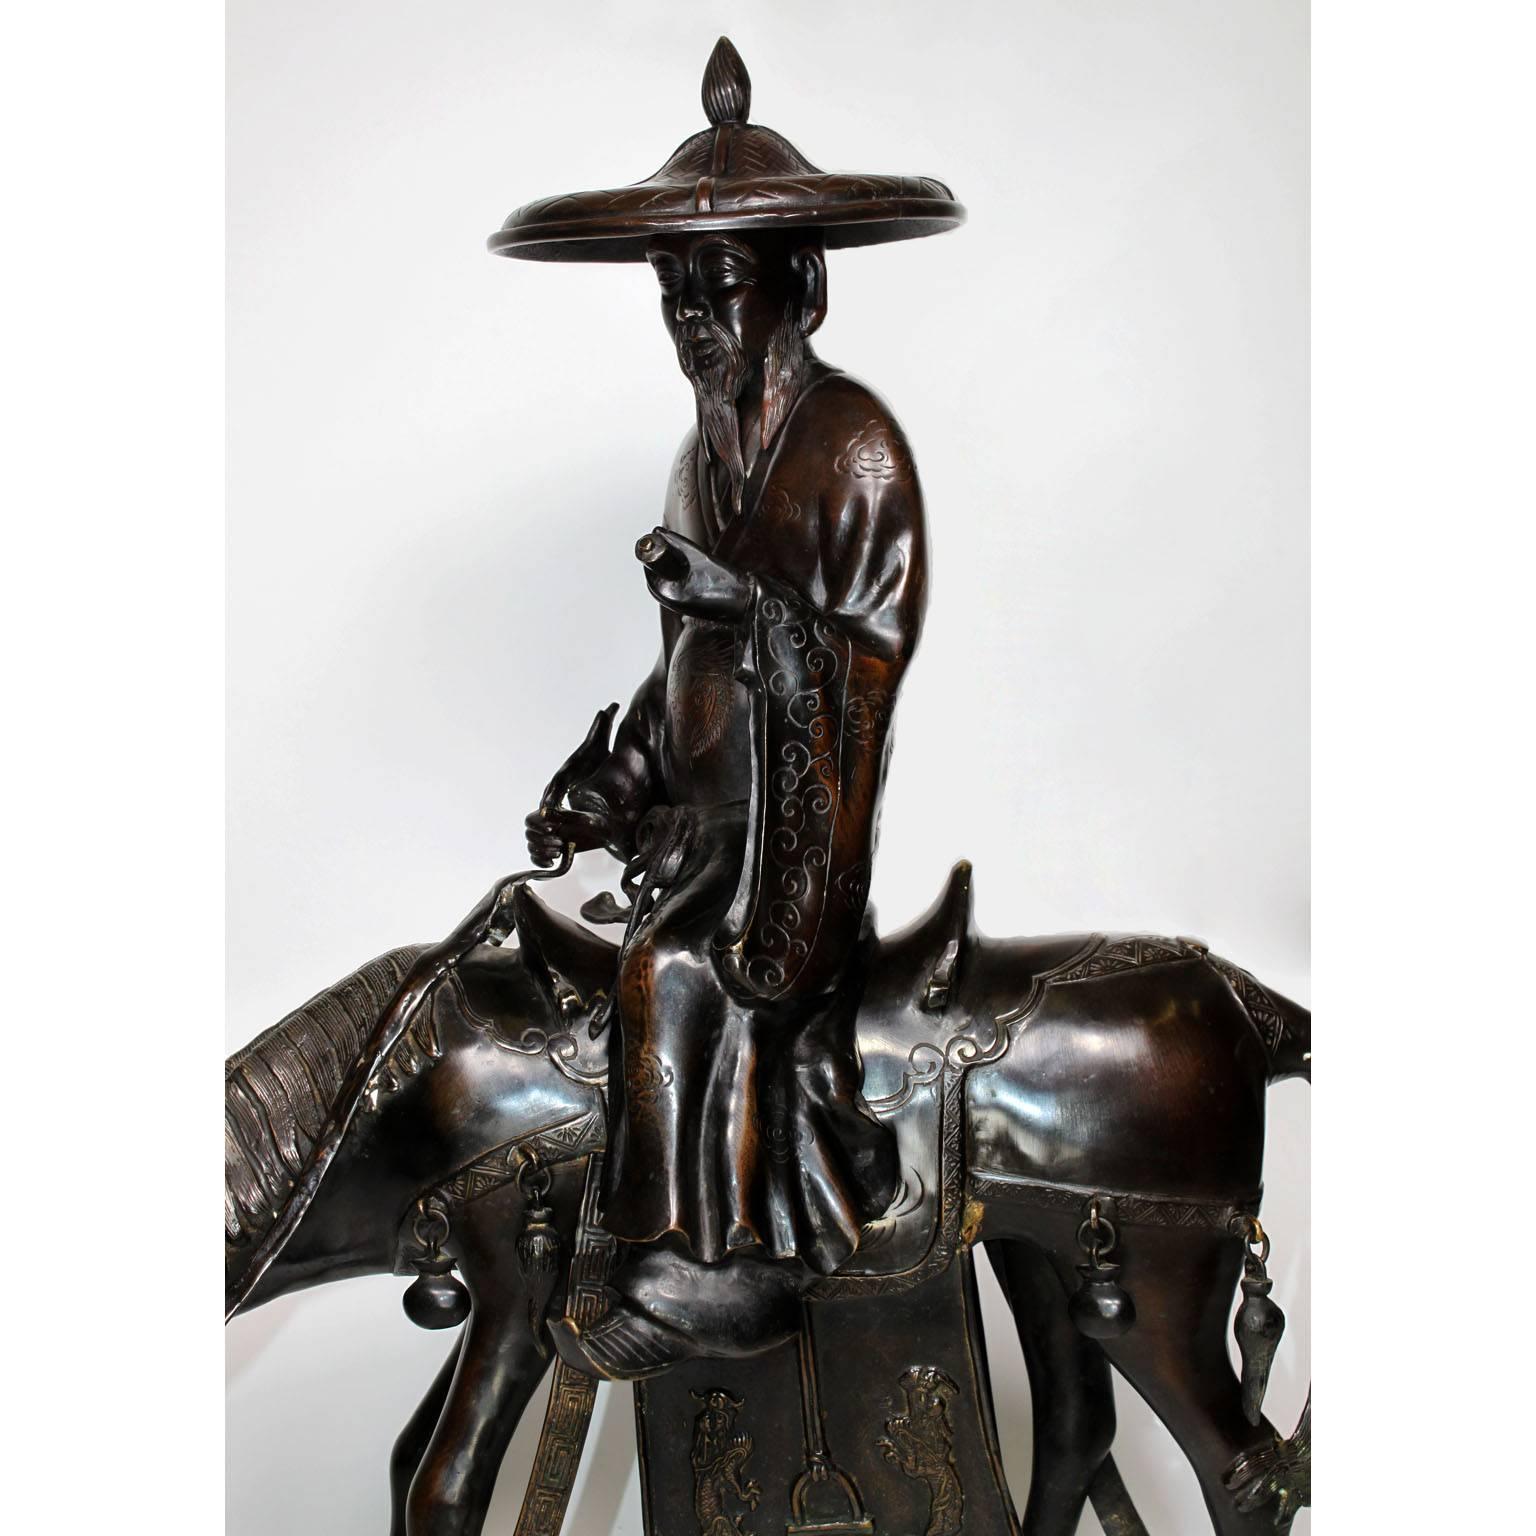 A fine and large Japanese Meiji period 19th-20th century bronze figural incense burner censer depicting an old man riding a donkey - mule. Signed in Japanese. In a brown patina, circa 1900.

The burning of incense in Japan began during the 6th